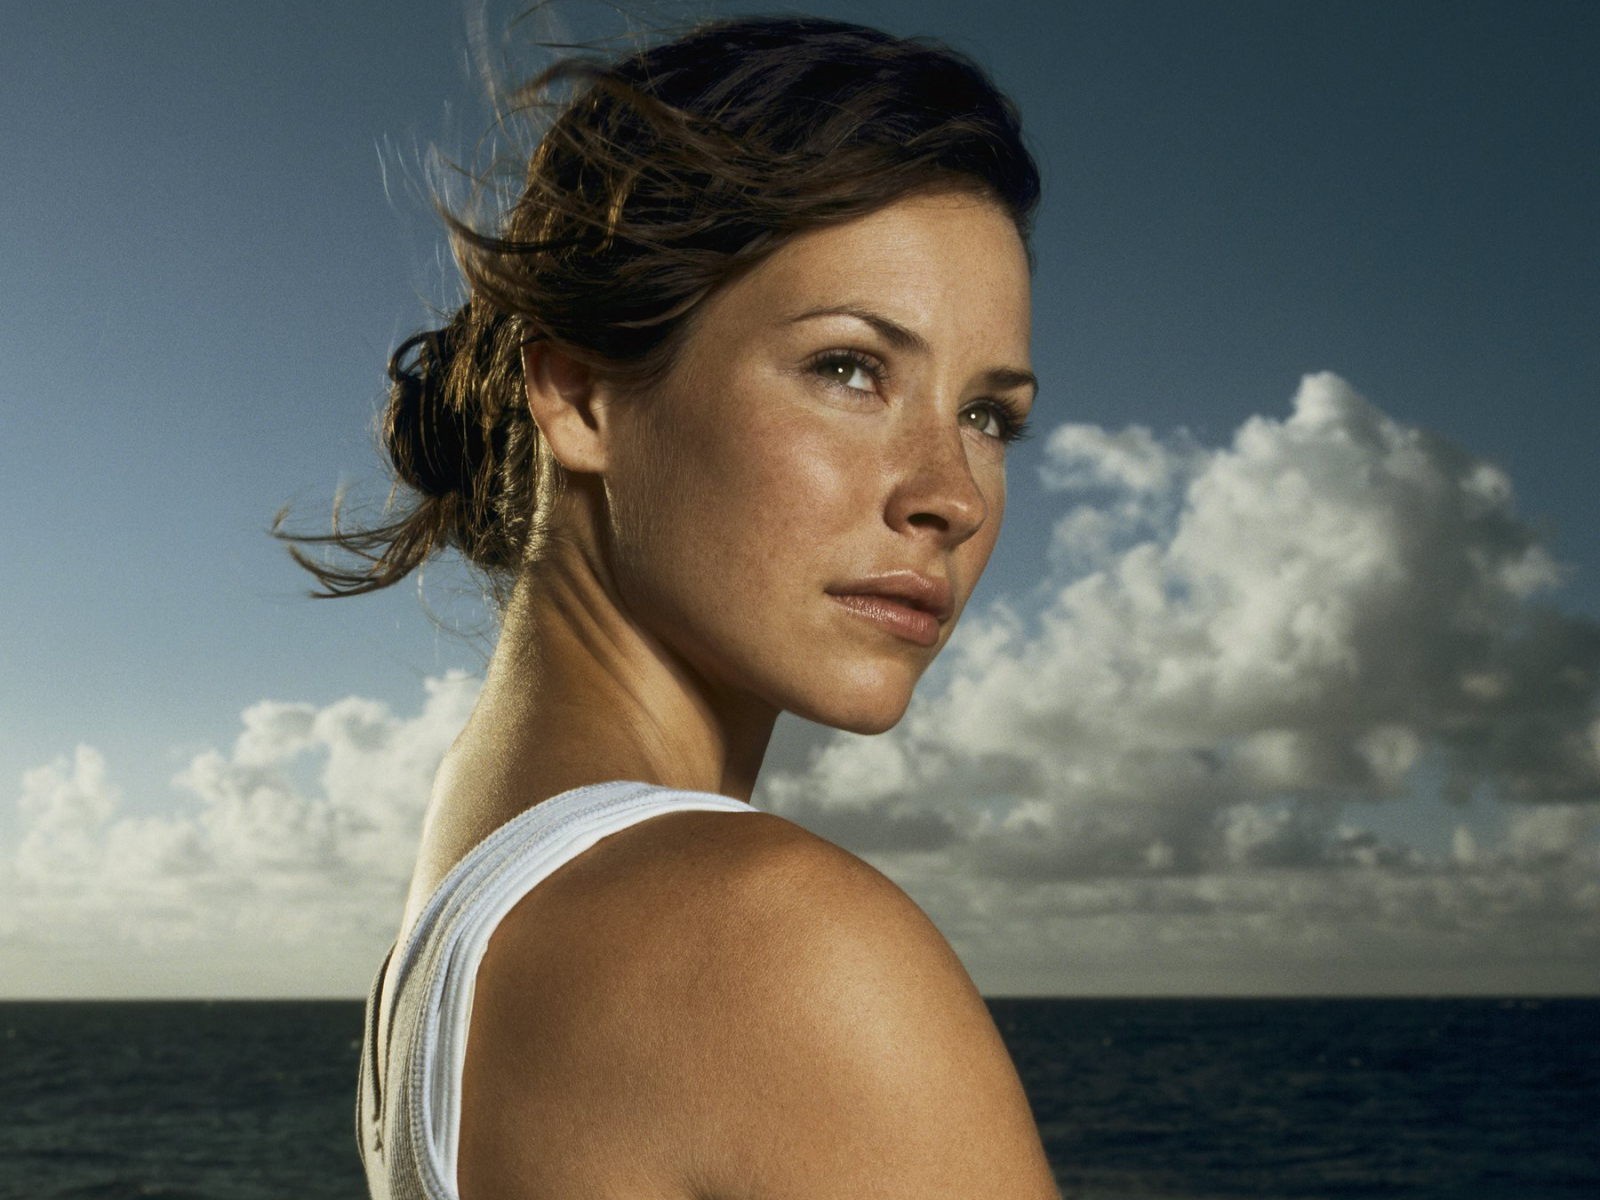 People 1600x1200 Evangeline Lilly face actress women TV series Lost brunette